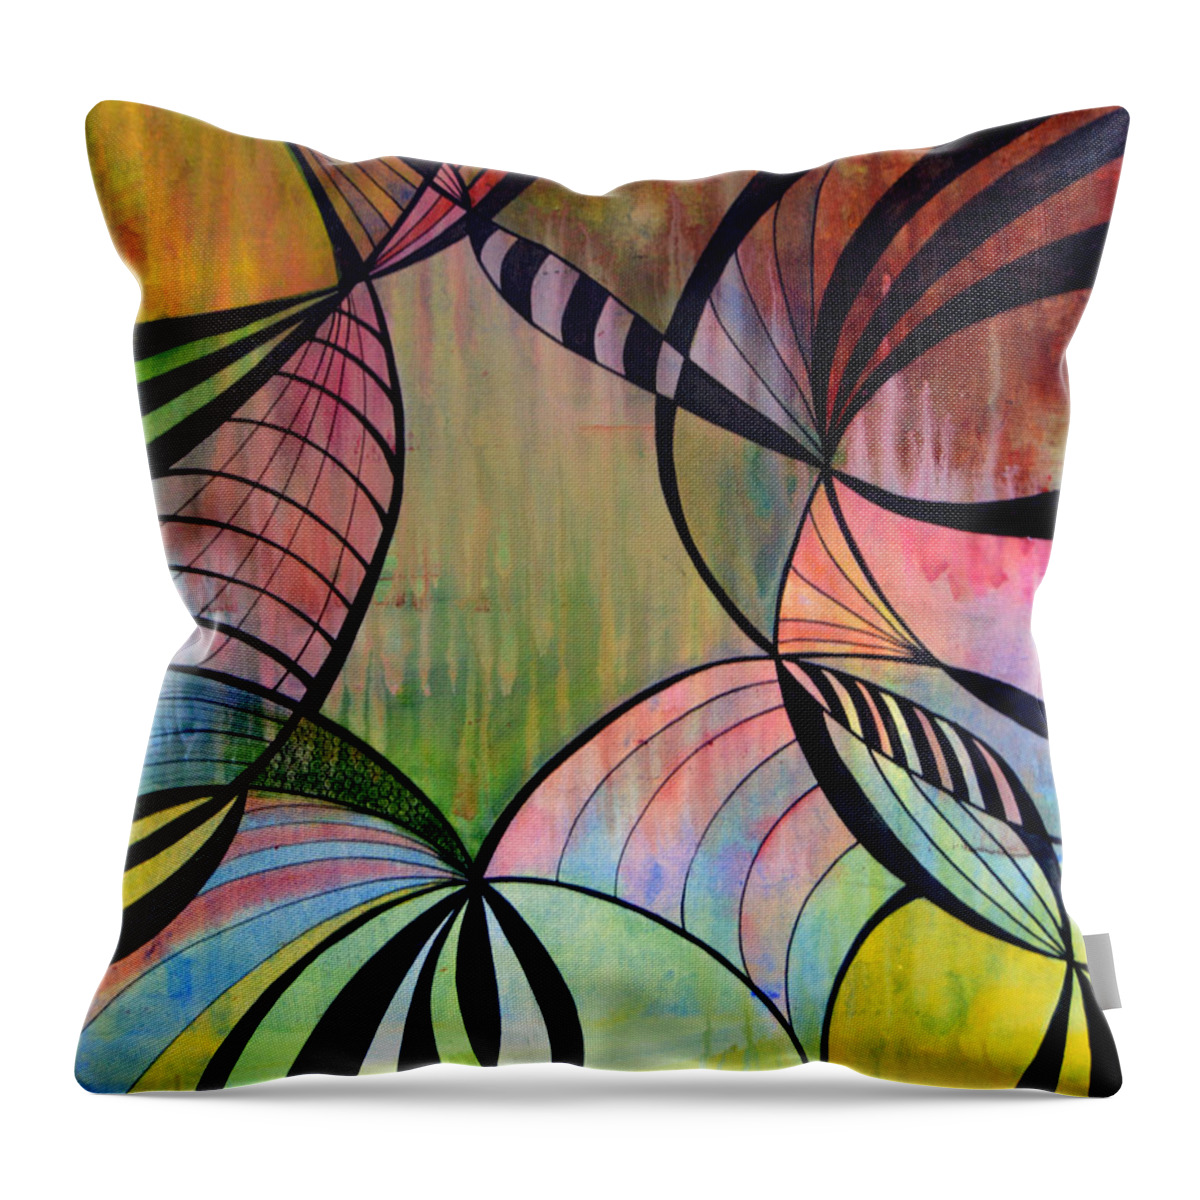 Stained Glass Throw Pillow featuring the painting Un Stained Glass by Lynellen Nielsen